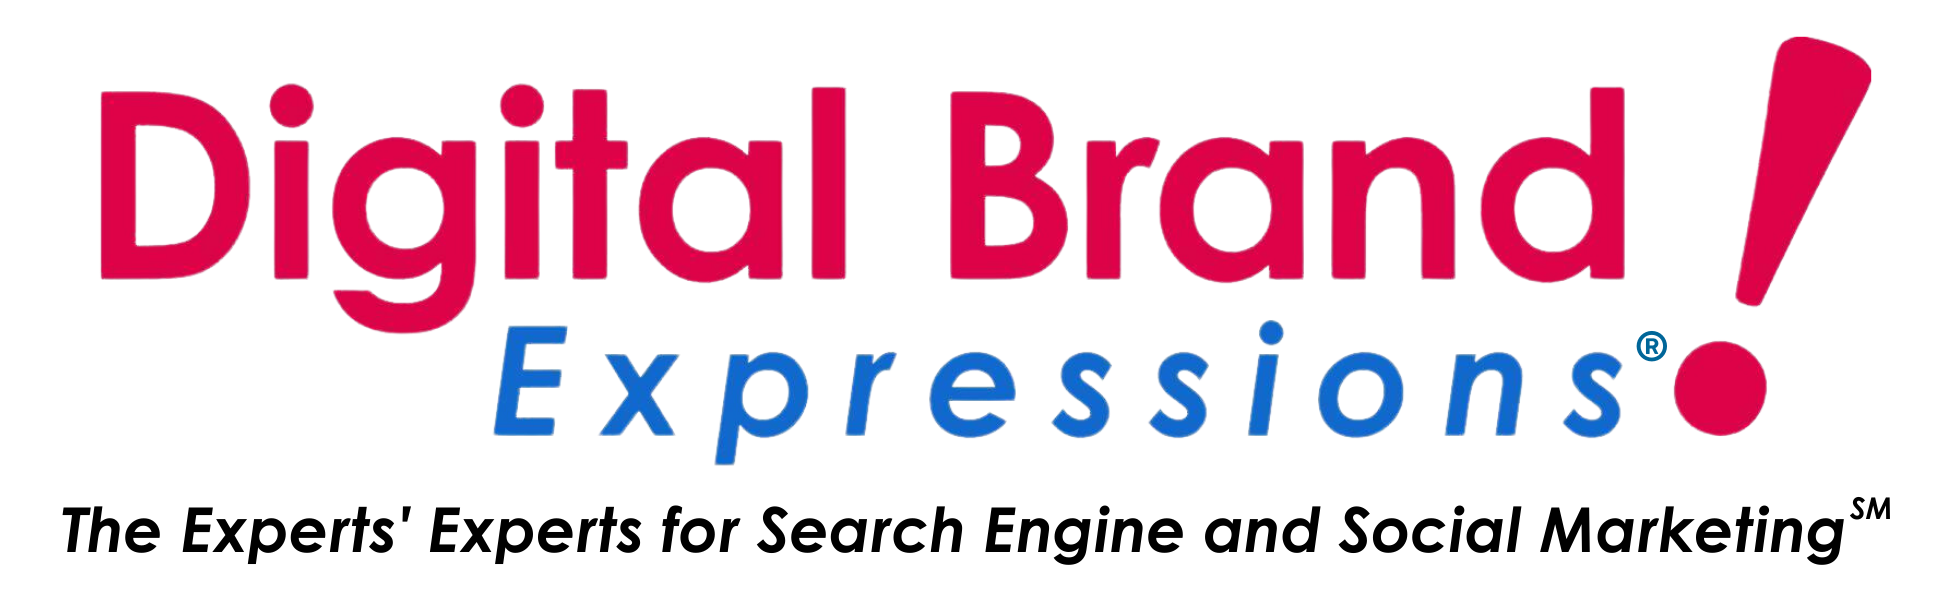 Digital Brand Expressions! The Experts' Experts for Search Engine and Social Marketing.